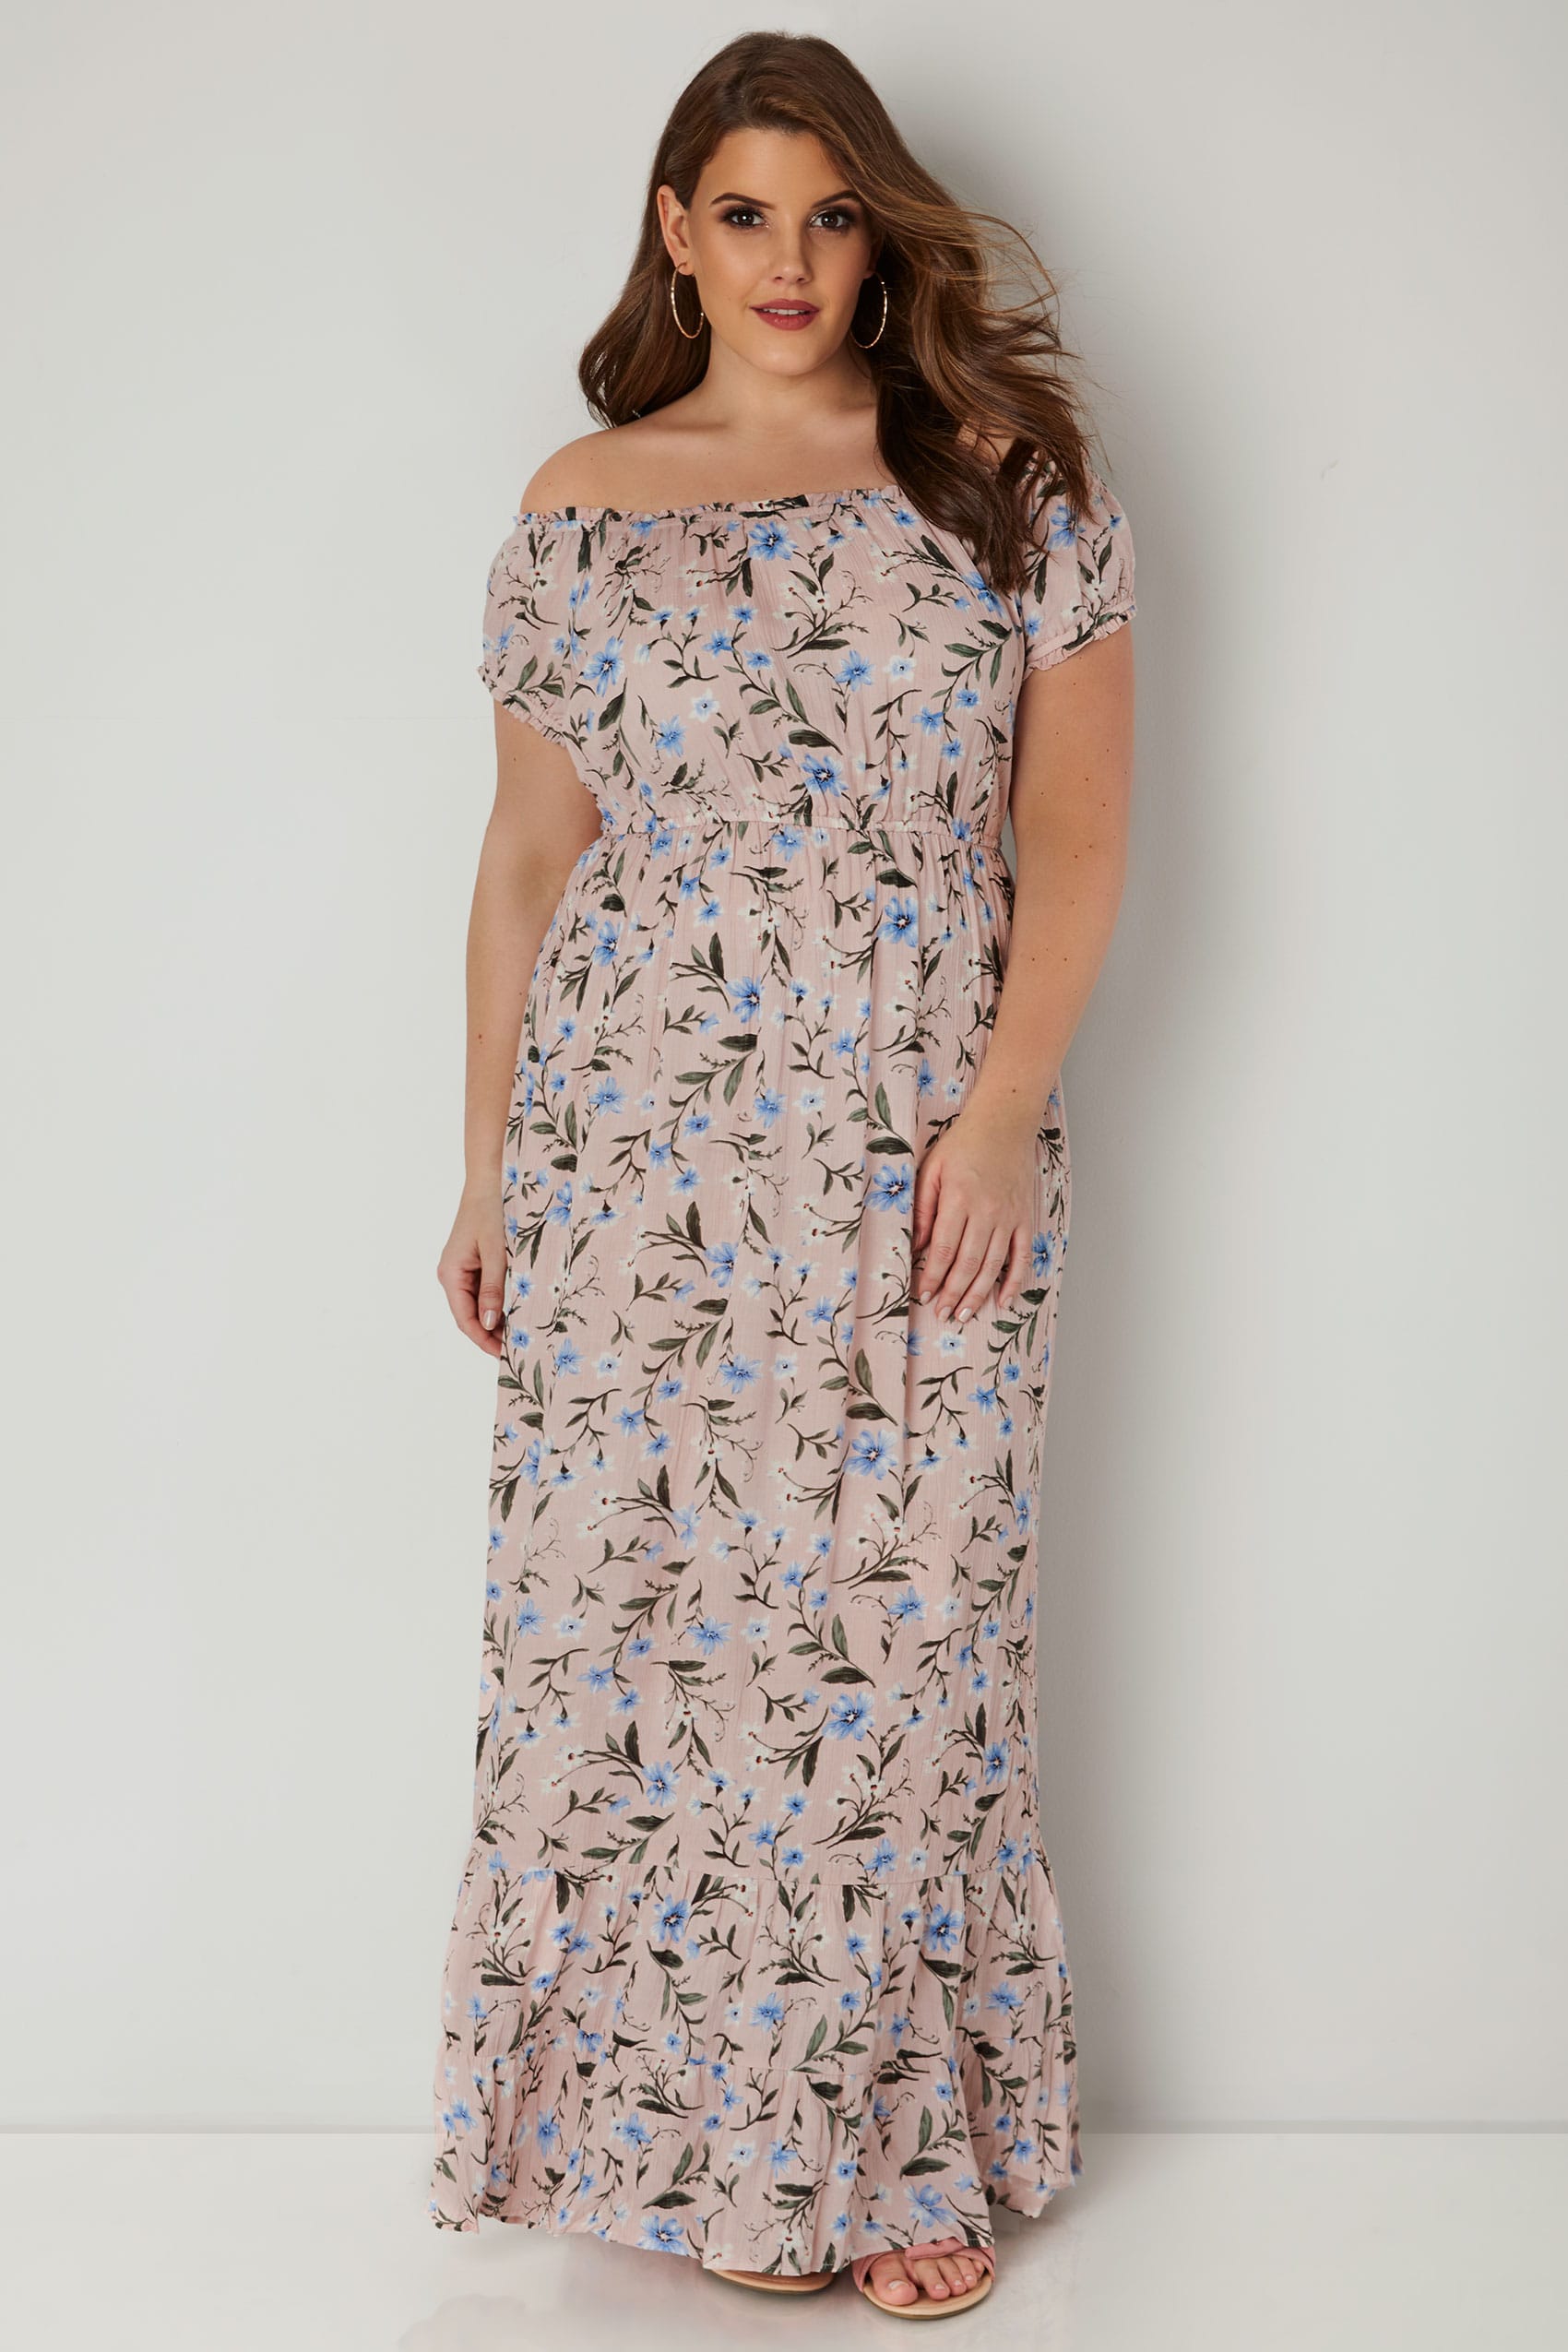 Light Pink Floral Maxi Dress, plus size 16 to 36